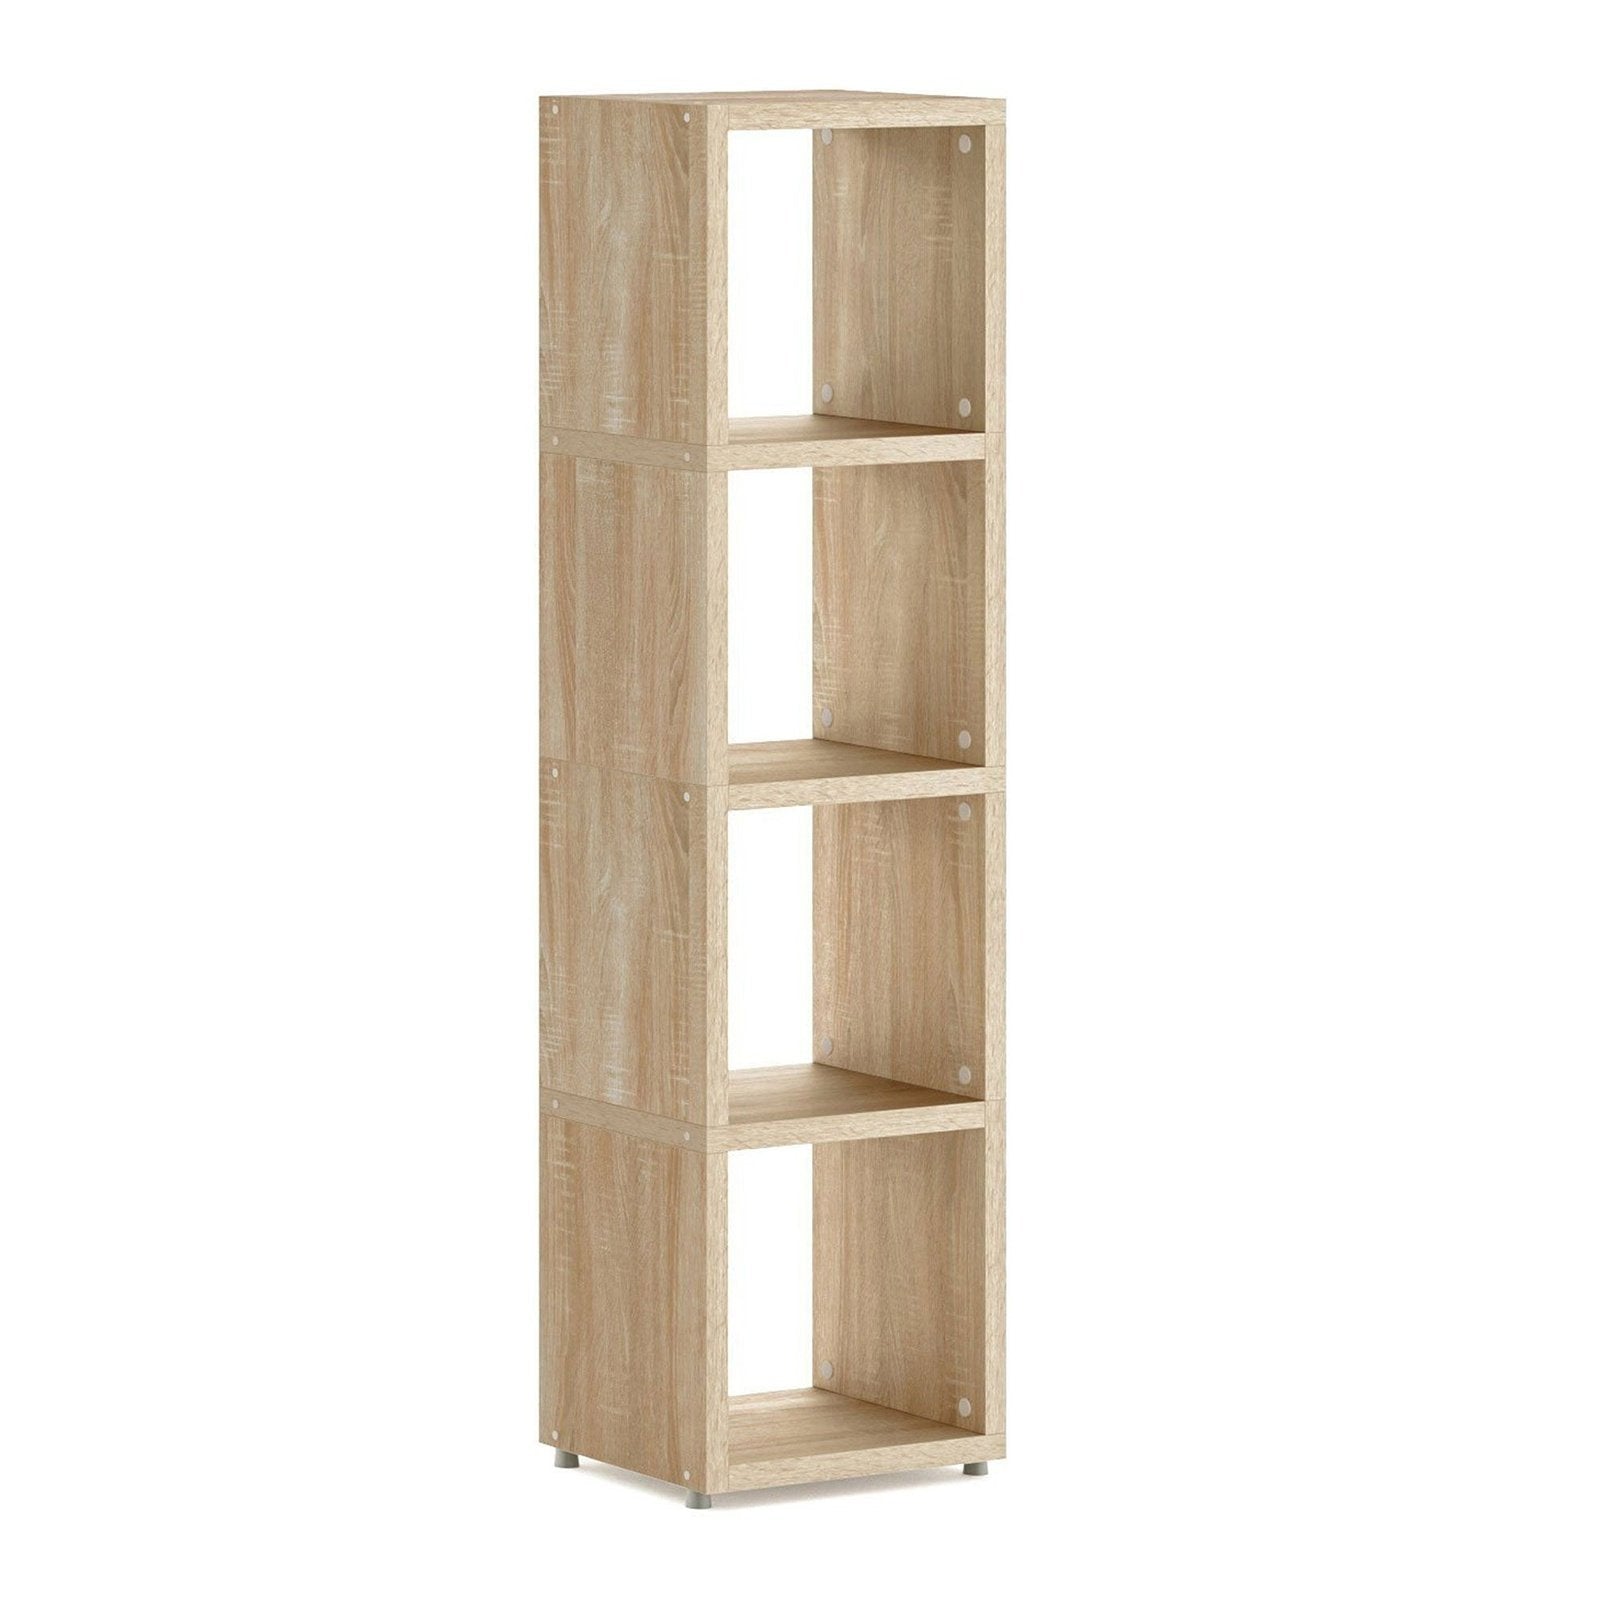 Boon 4x Cube Shelf Storage System - 1470x390x330mm - Office Products Online